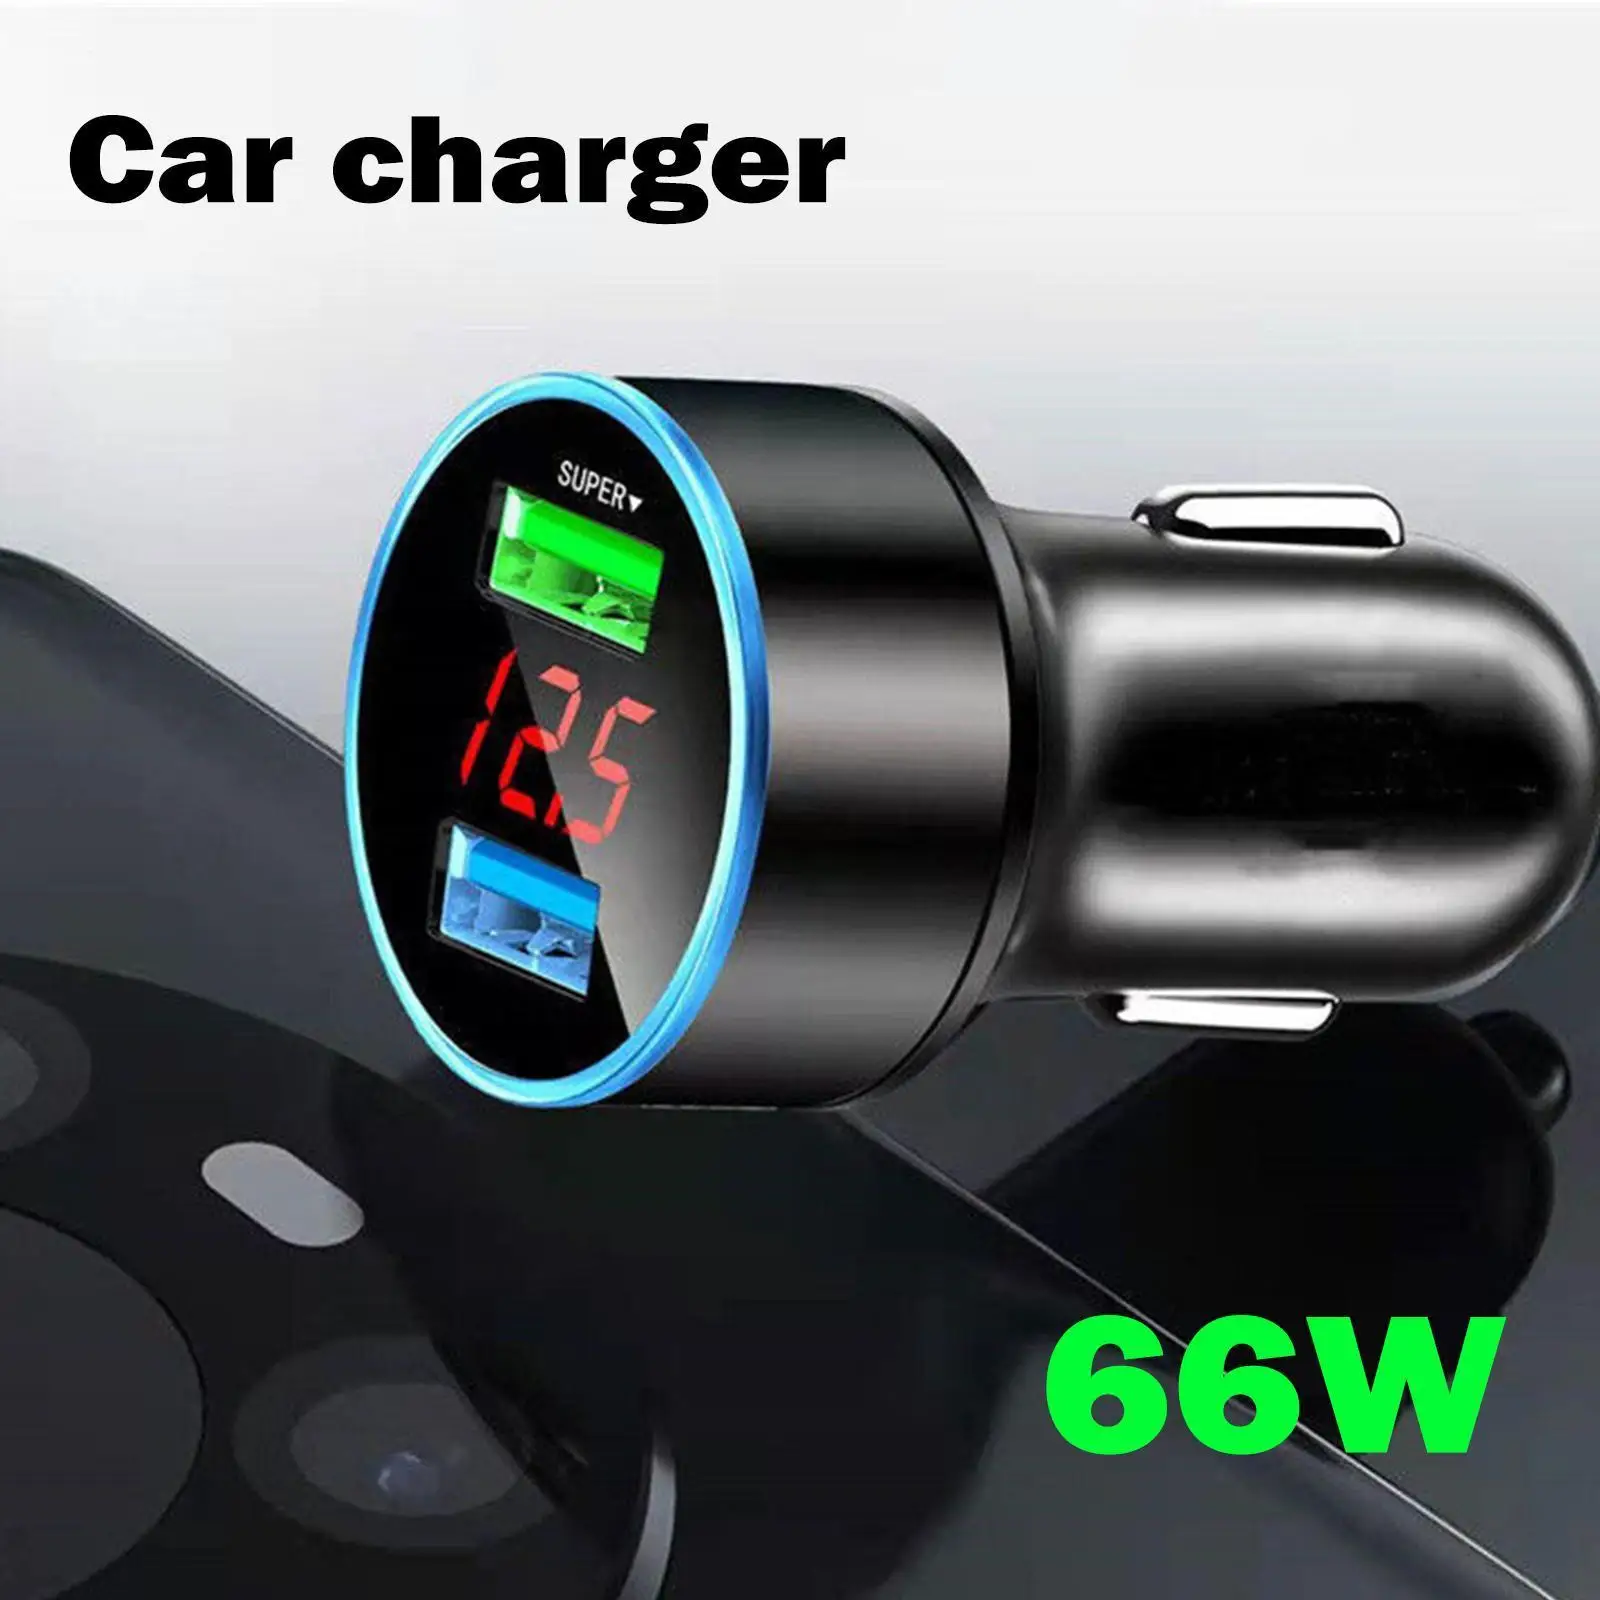 

66w Car Chargers Dual Usb Ports Fast Charging Digital Qc3.0 Display Adapter Car Charger Charging Cigarette Lighter Car O3c7